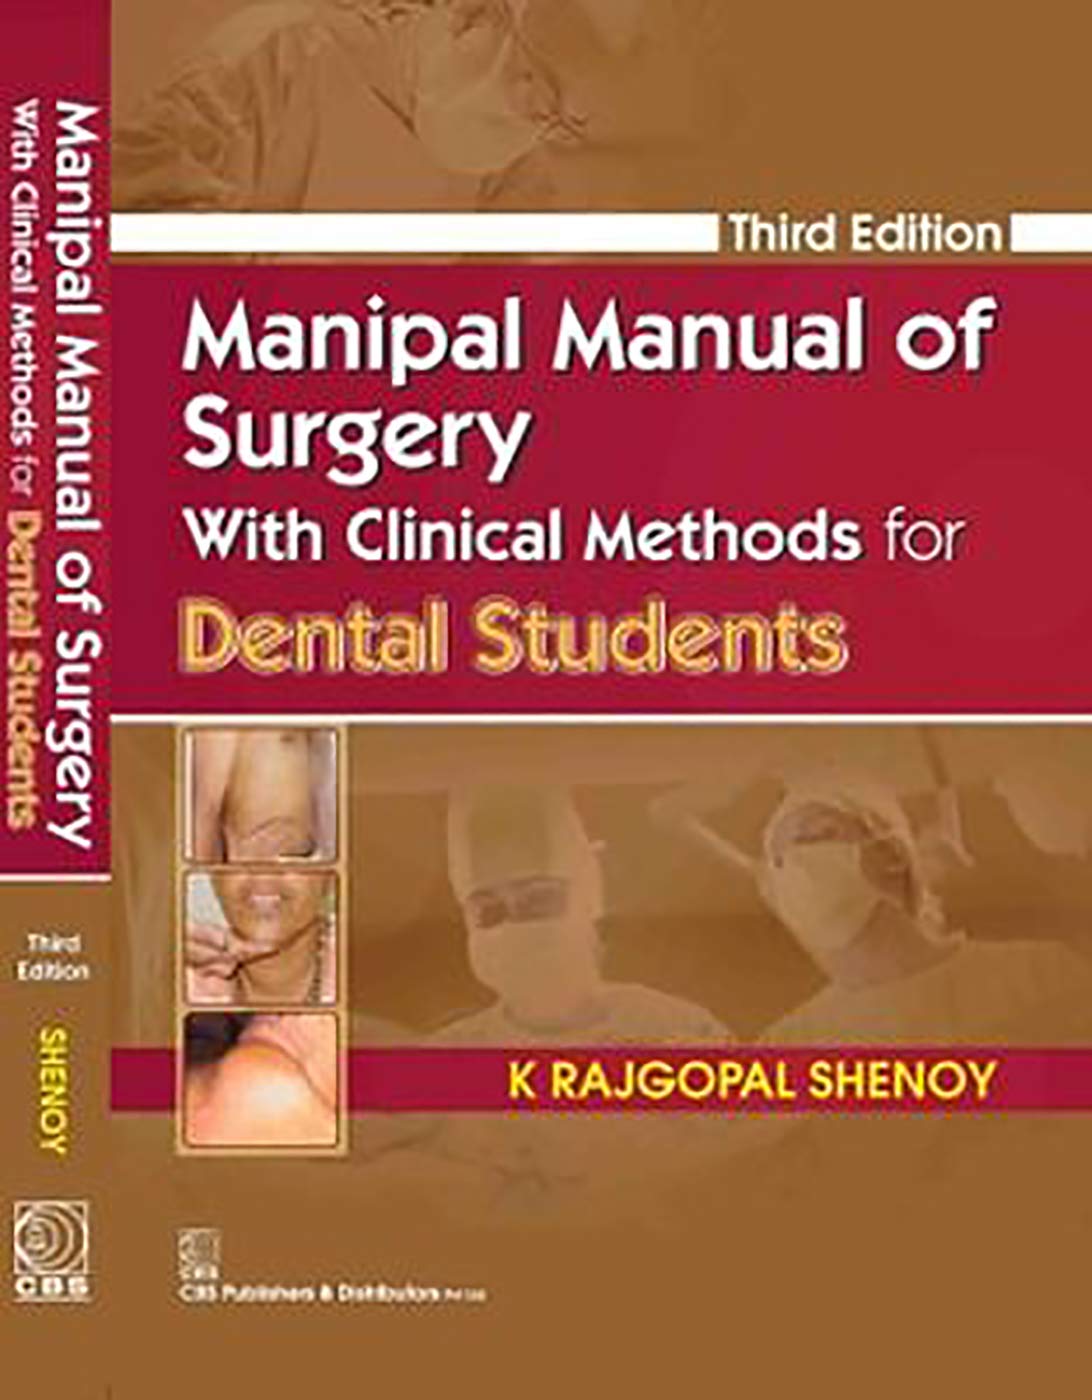 Manipal Manual Of Surgery With Clinical Methods For Dental Students 3Ed (Pb 2020)